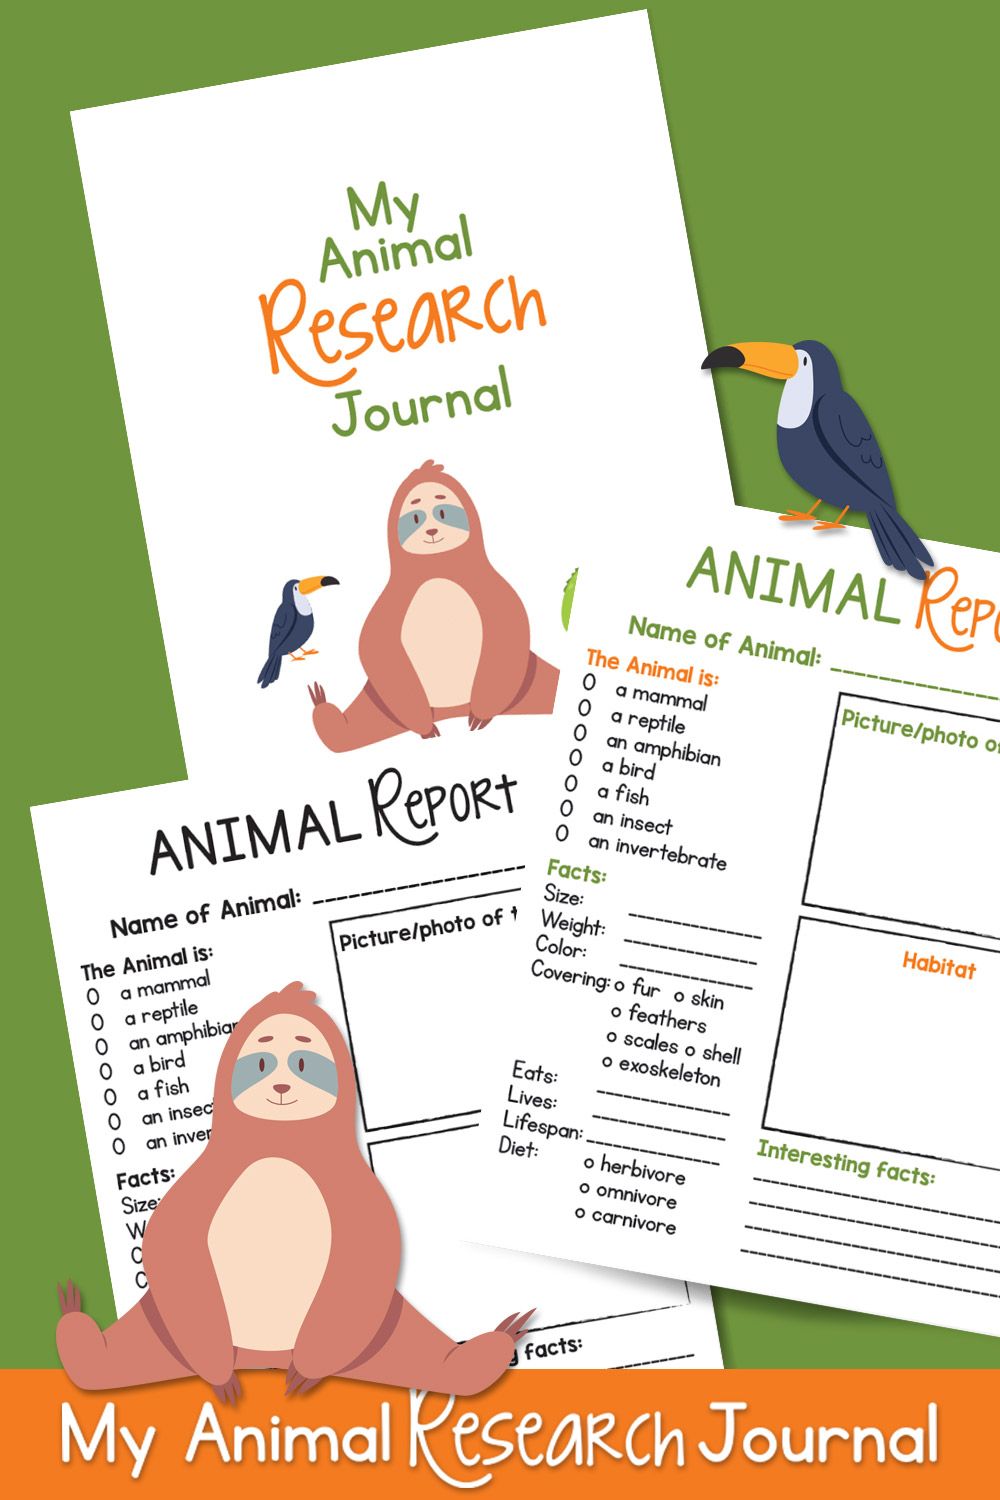 Free Printable Animal Report Template for Kids - Frugal Mom Eh!